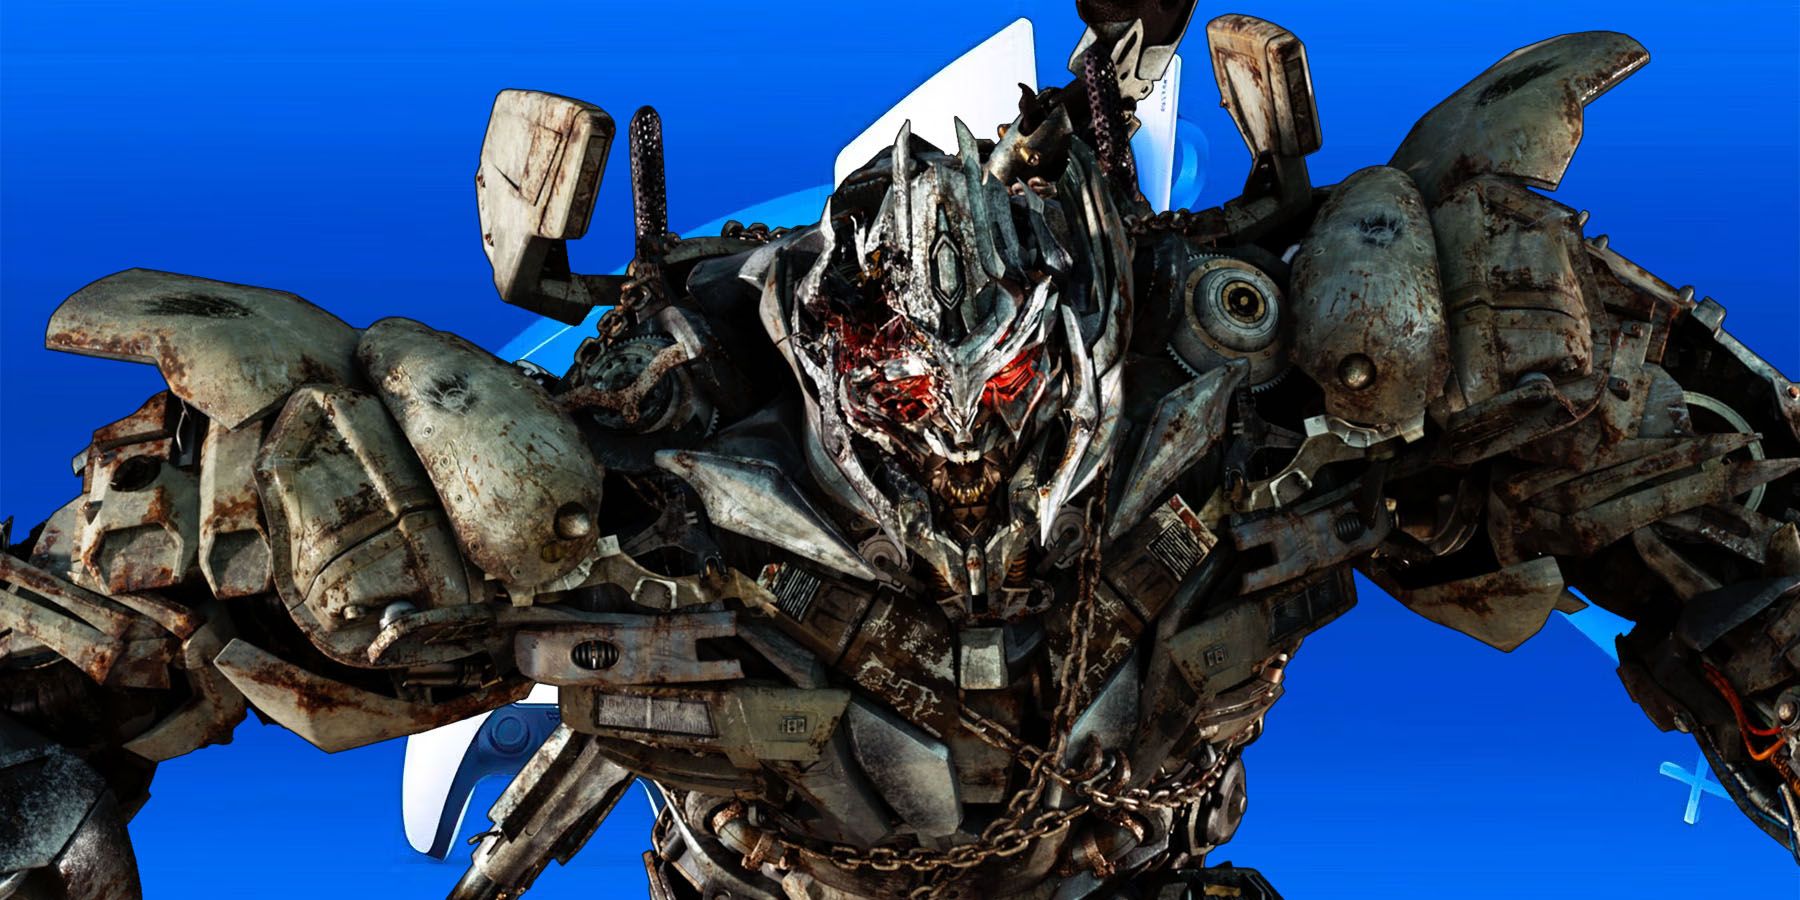 An image of Megatron from Transformers: Dark of the Moon placed in front of a PlayStation 5 against a blue background.